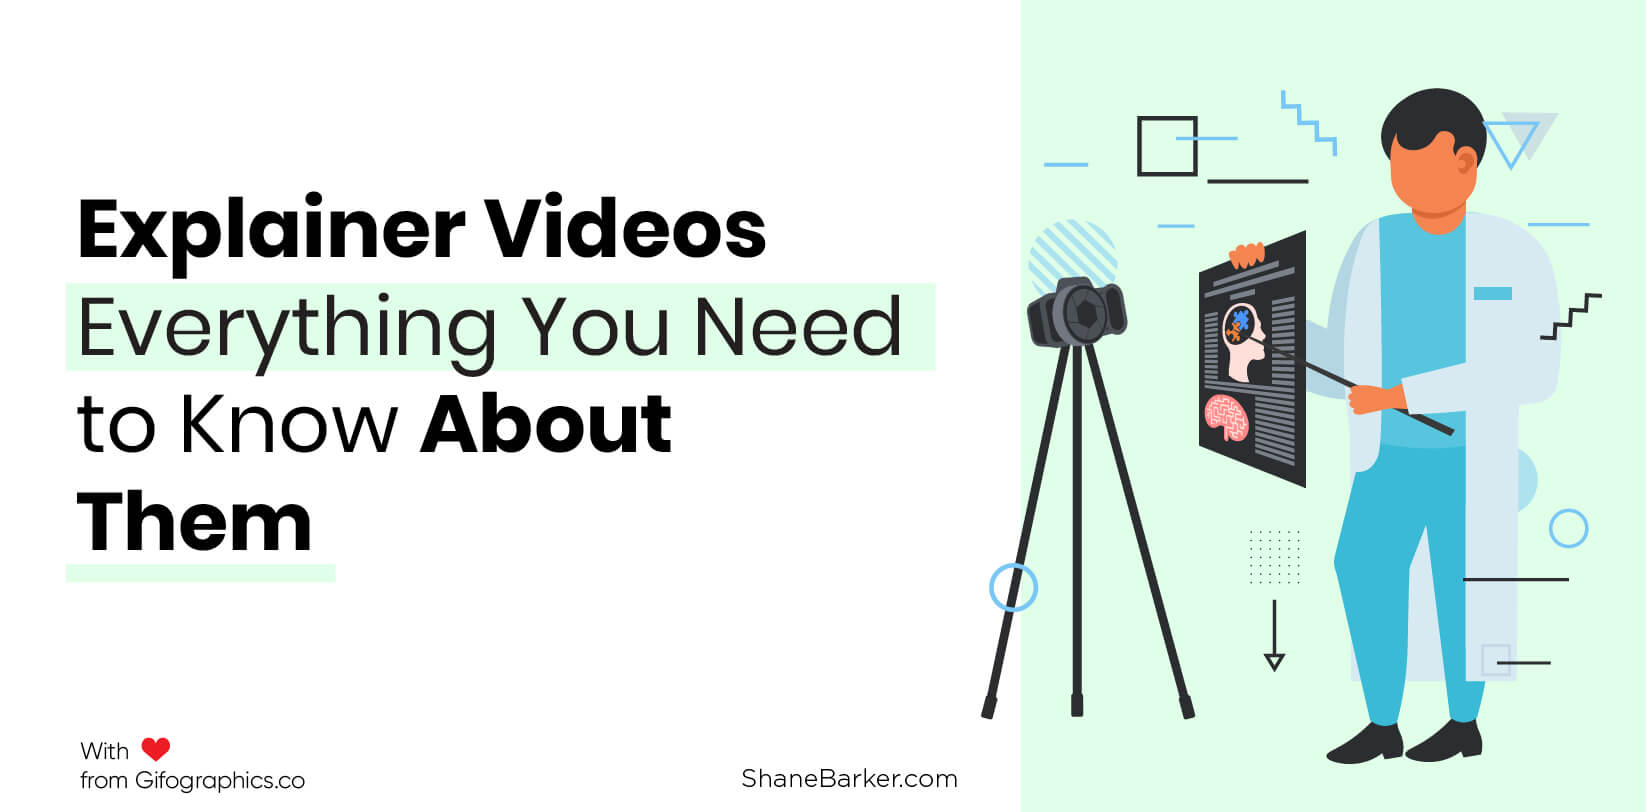 Explainer Videos: Everything You Need to Know